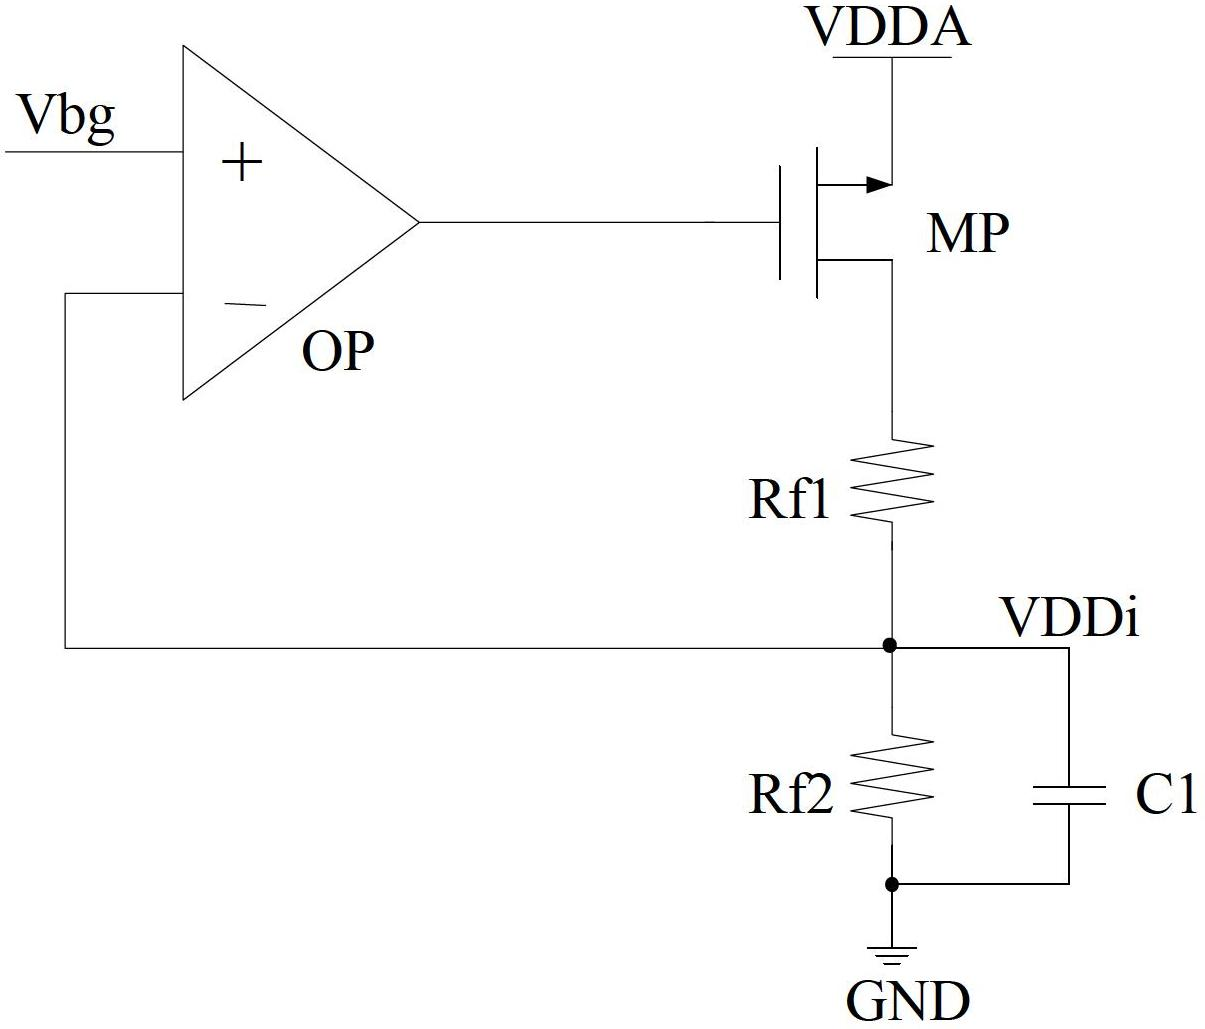 Low noise bandgap reference circuit and reference source generation system